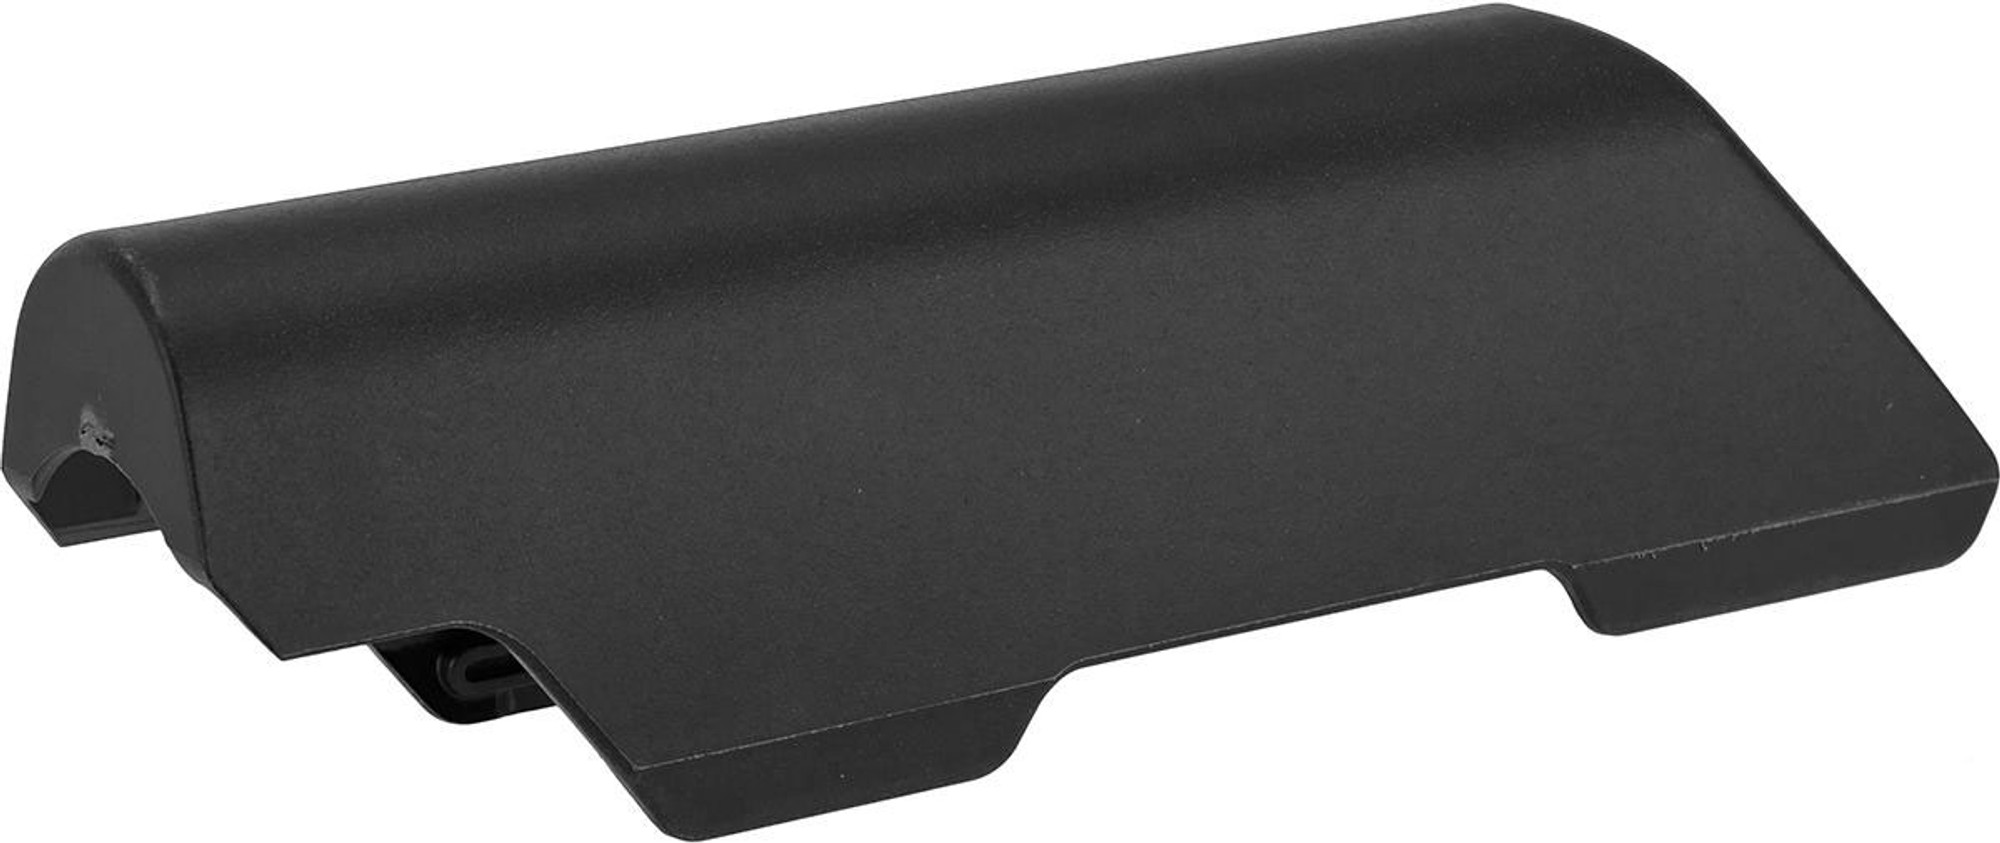 Magpul .75" Polymer Riser for Magpul MOE and CRT Retractable Stocks (Color: Black)